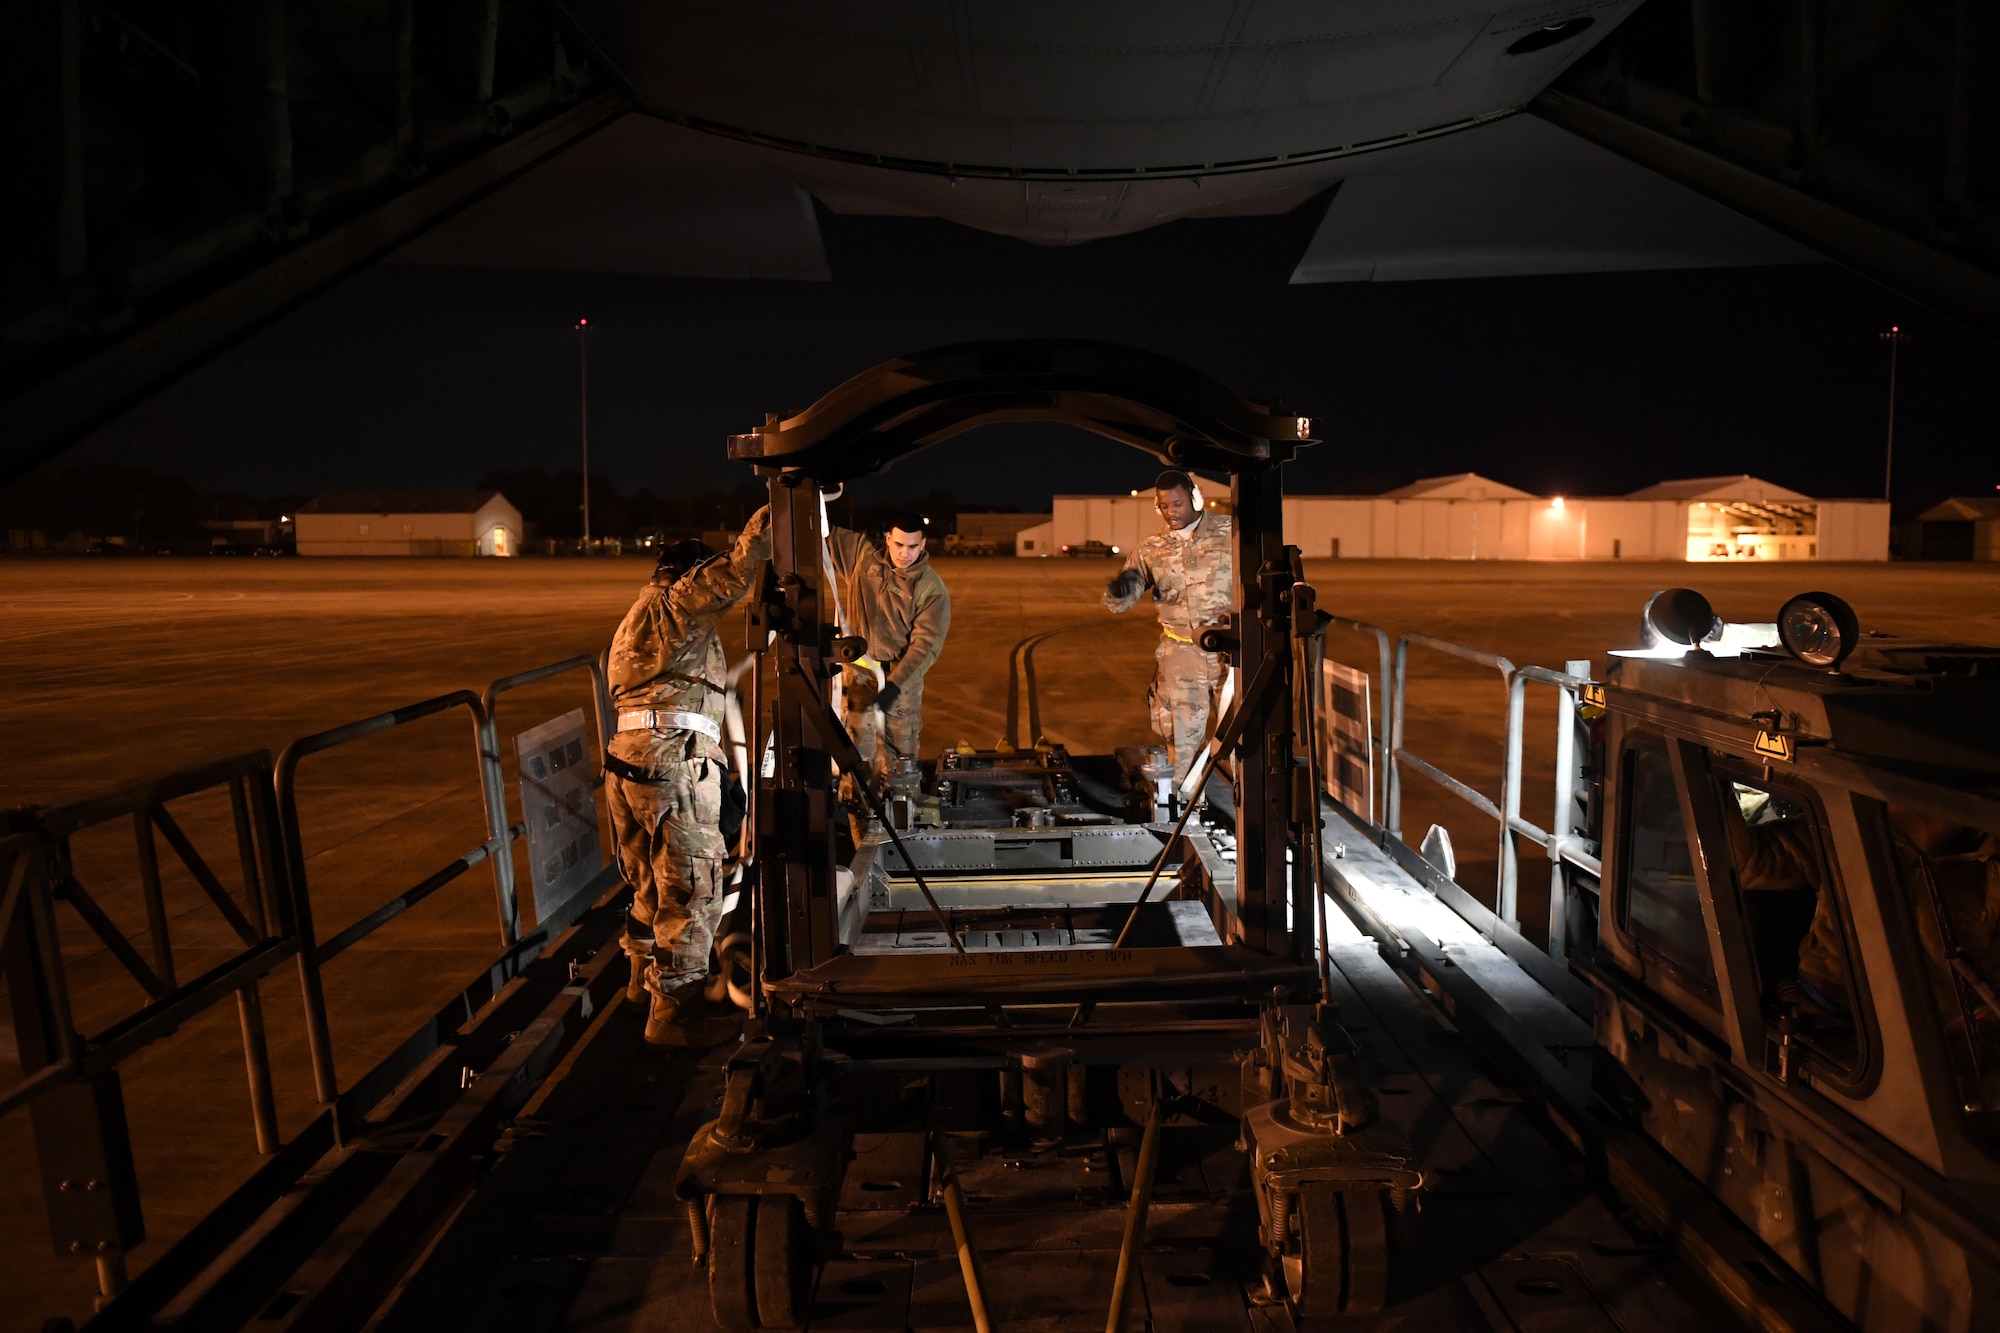 Aerial porters assigned to the 921st Contingency Response Squadron out of Travis Air Force Base, Calif., secure cargo onto a Halvorsen loader during a mission in support of Green Flag Little Rock exercise, Feb. 10, 2019, at the Alexandria International Airport, La. The primary objective of the exercise is to support the Joint Readiness Training Center and provide the maximum number of airlift crews, mission planners and ground support elements to a simulated combat environment with emphasis on joint force integration. (U.S. Air Force photo by Tech. Sgt. Liliana Moreno)